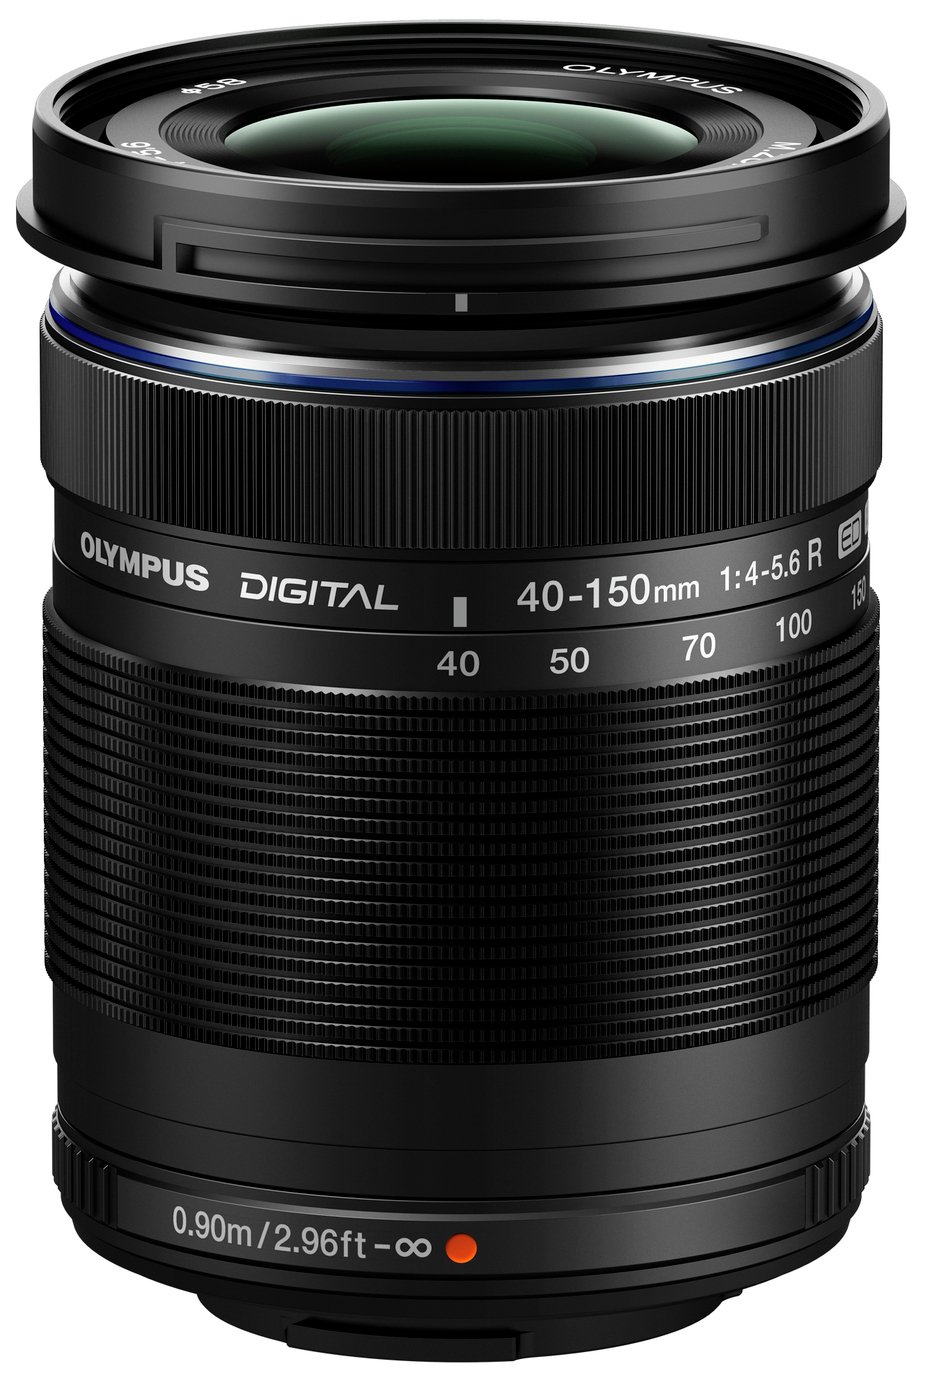 Olympus 40-150mm Telephoto Zoom Lens Review